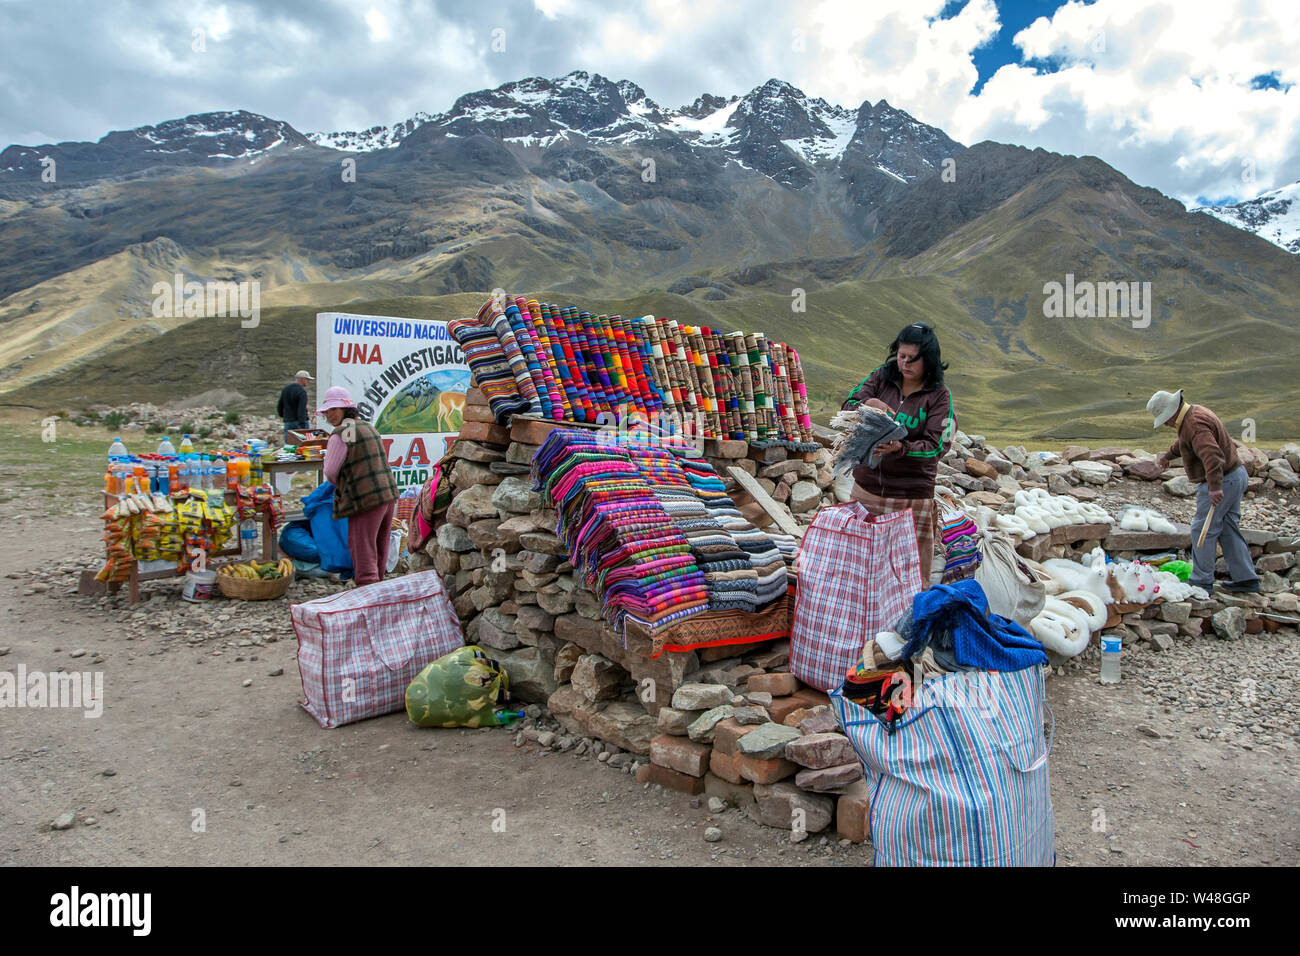 A souvenir and textile stall set up at La Region Puno Les Desea Feliz Viaje in Peru. This location lies at a height of 4335 metres above sea level. Stock Photo